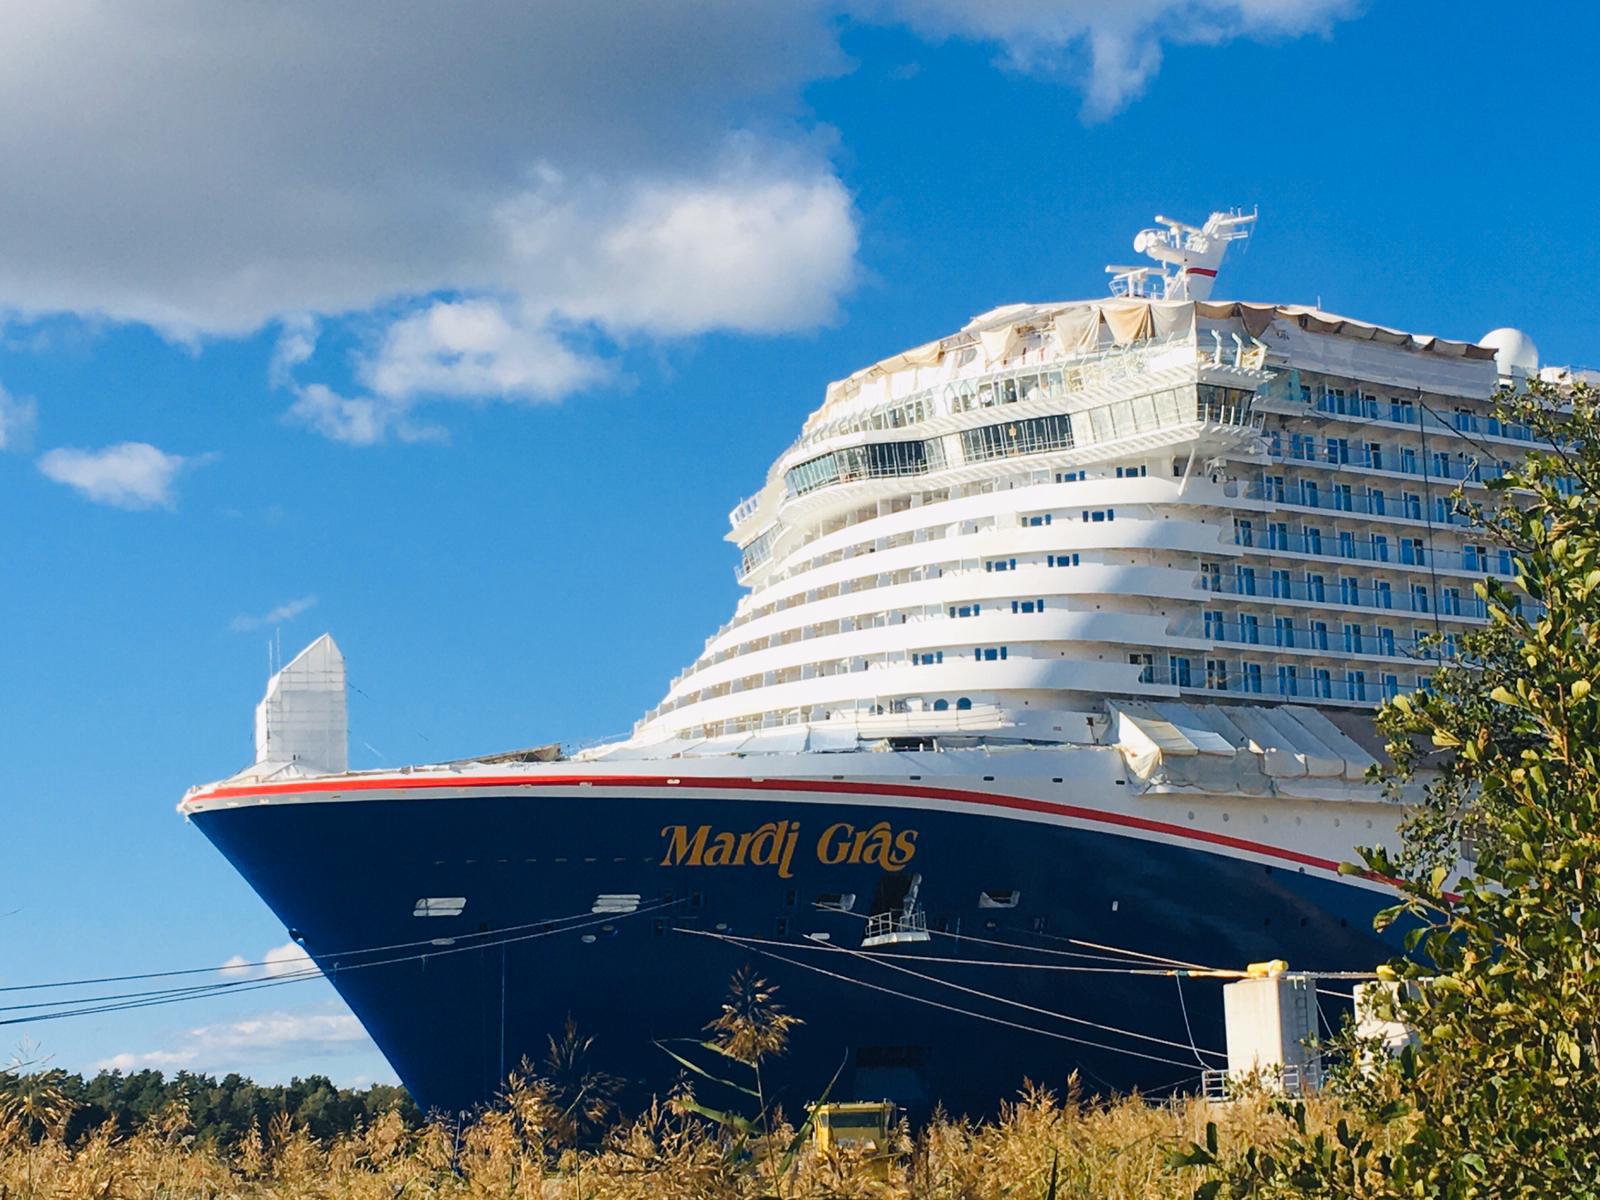 cruise ships will have a red, white, and blue design |